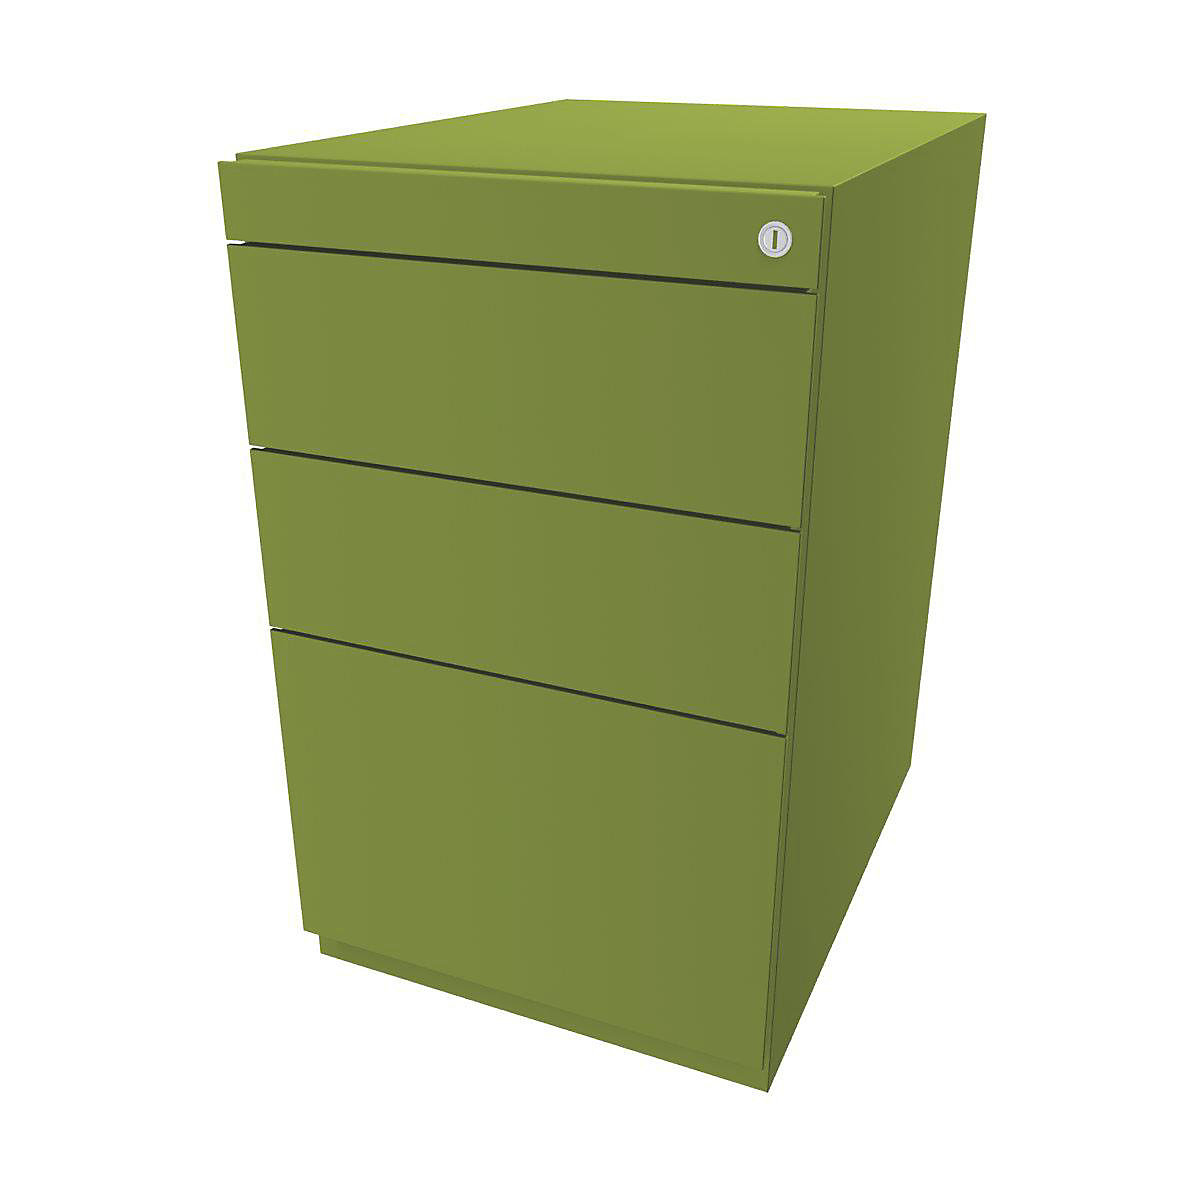 Note™ fixed pedestal, with 2 universal drawers, 1 suspension file drawer – BISLEY, without top, depth 565 mm, green-6